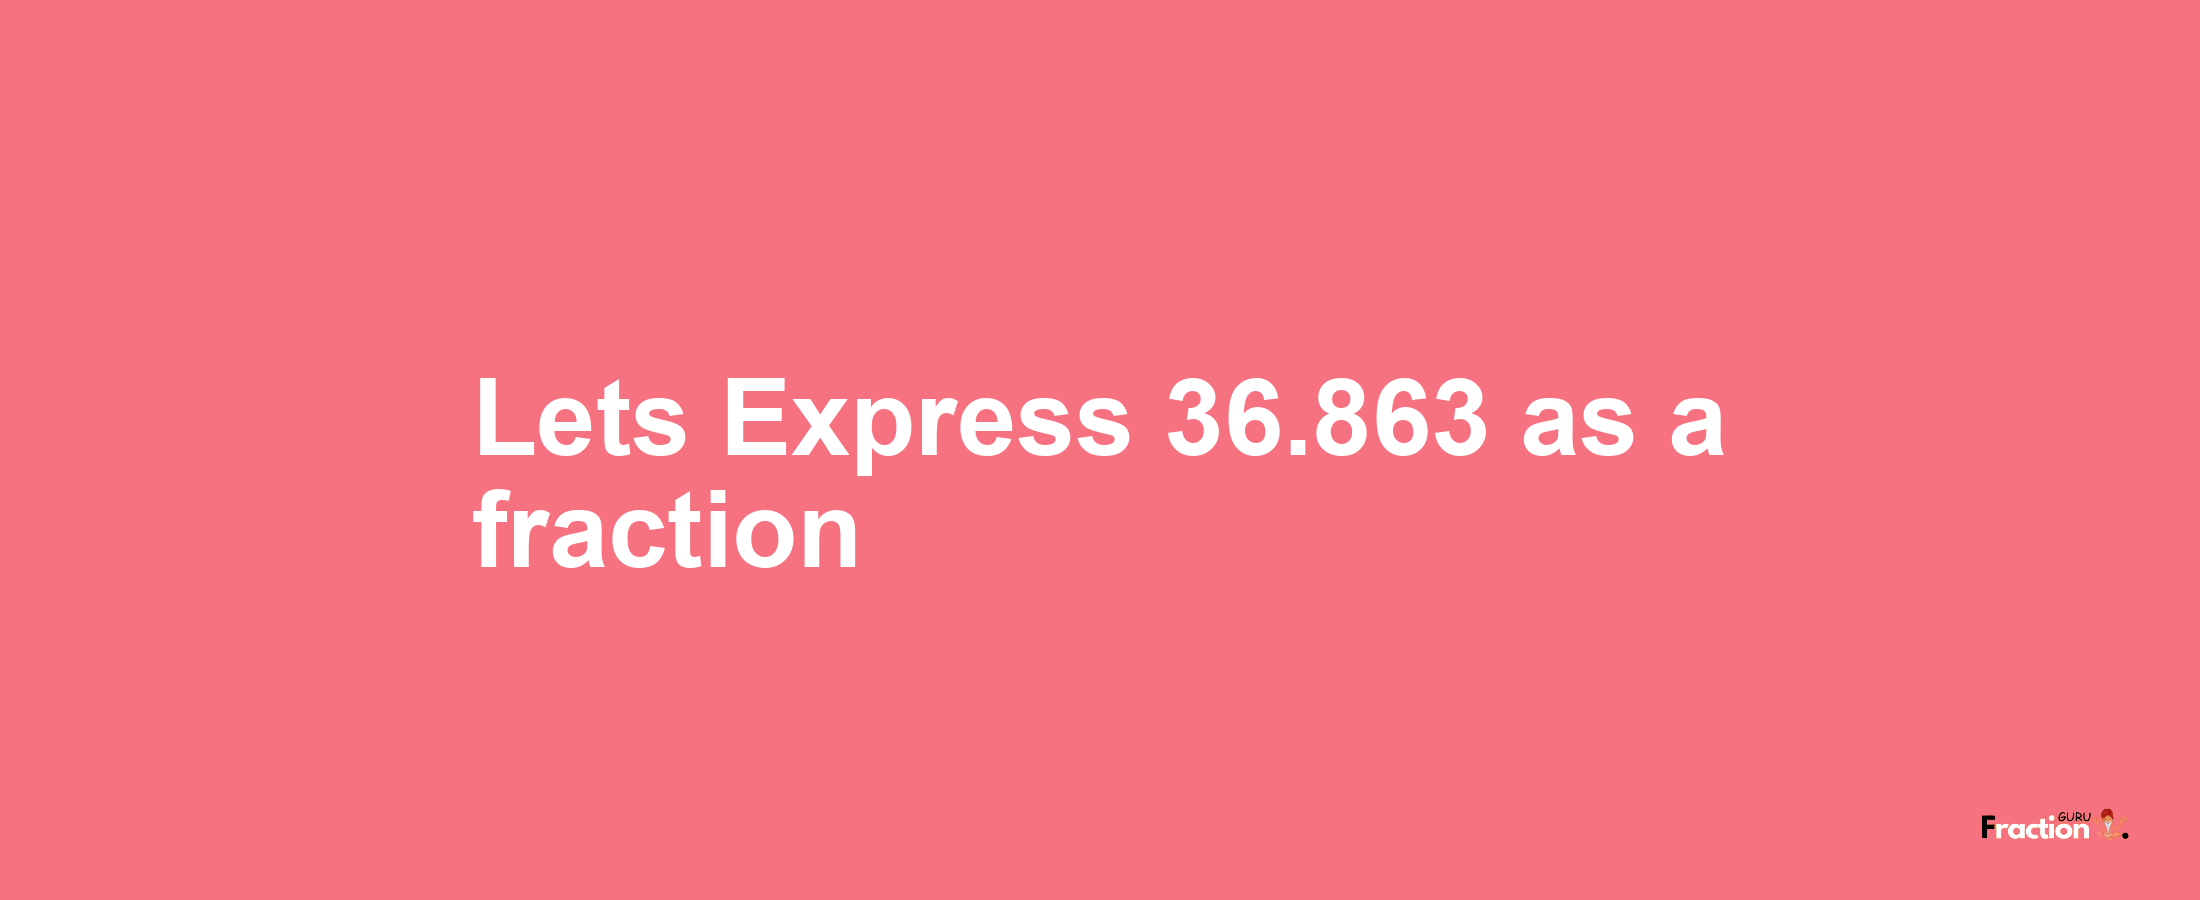 Lets Express 36.863 as afraction